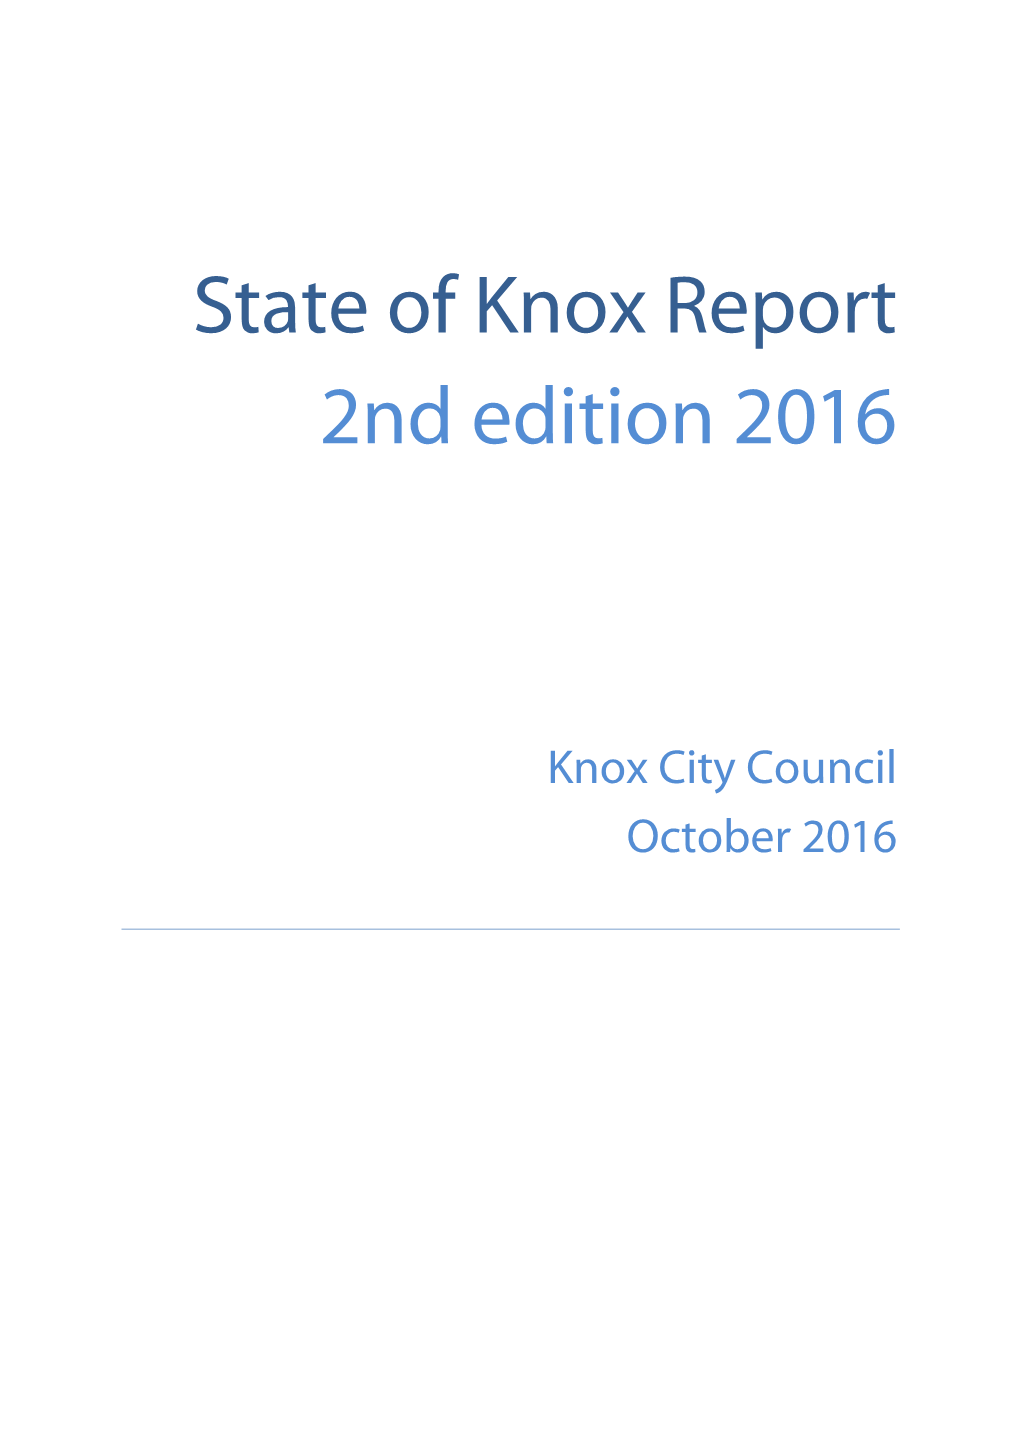 State of Knox Report 2Nd Edition 2016